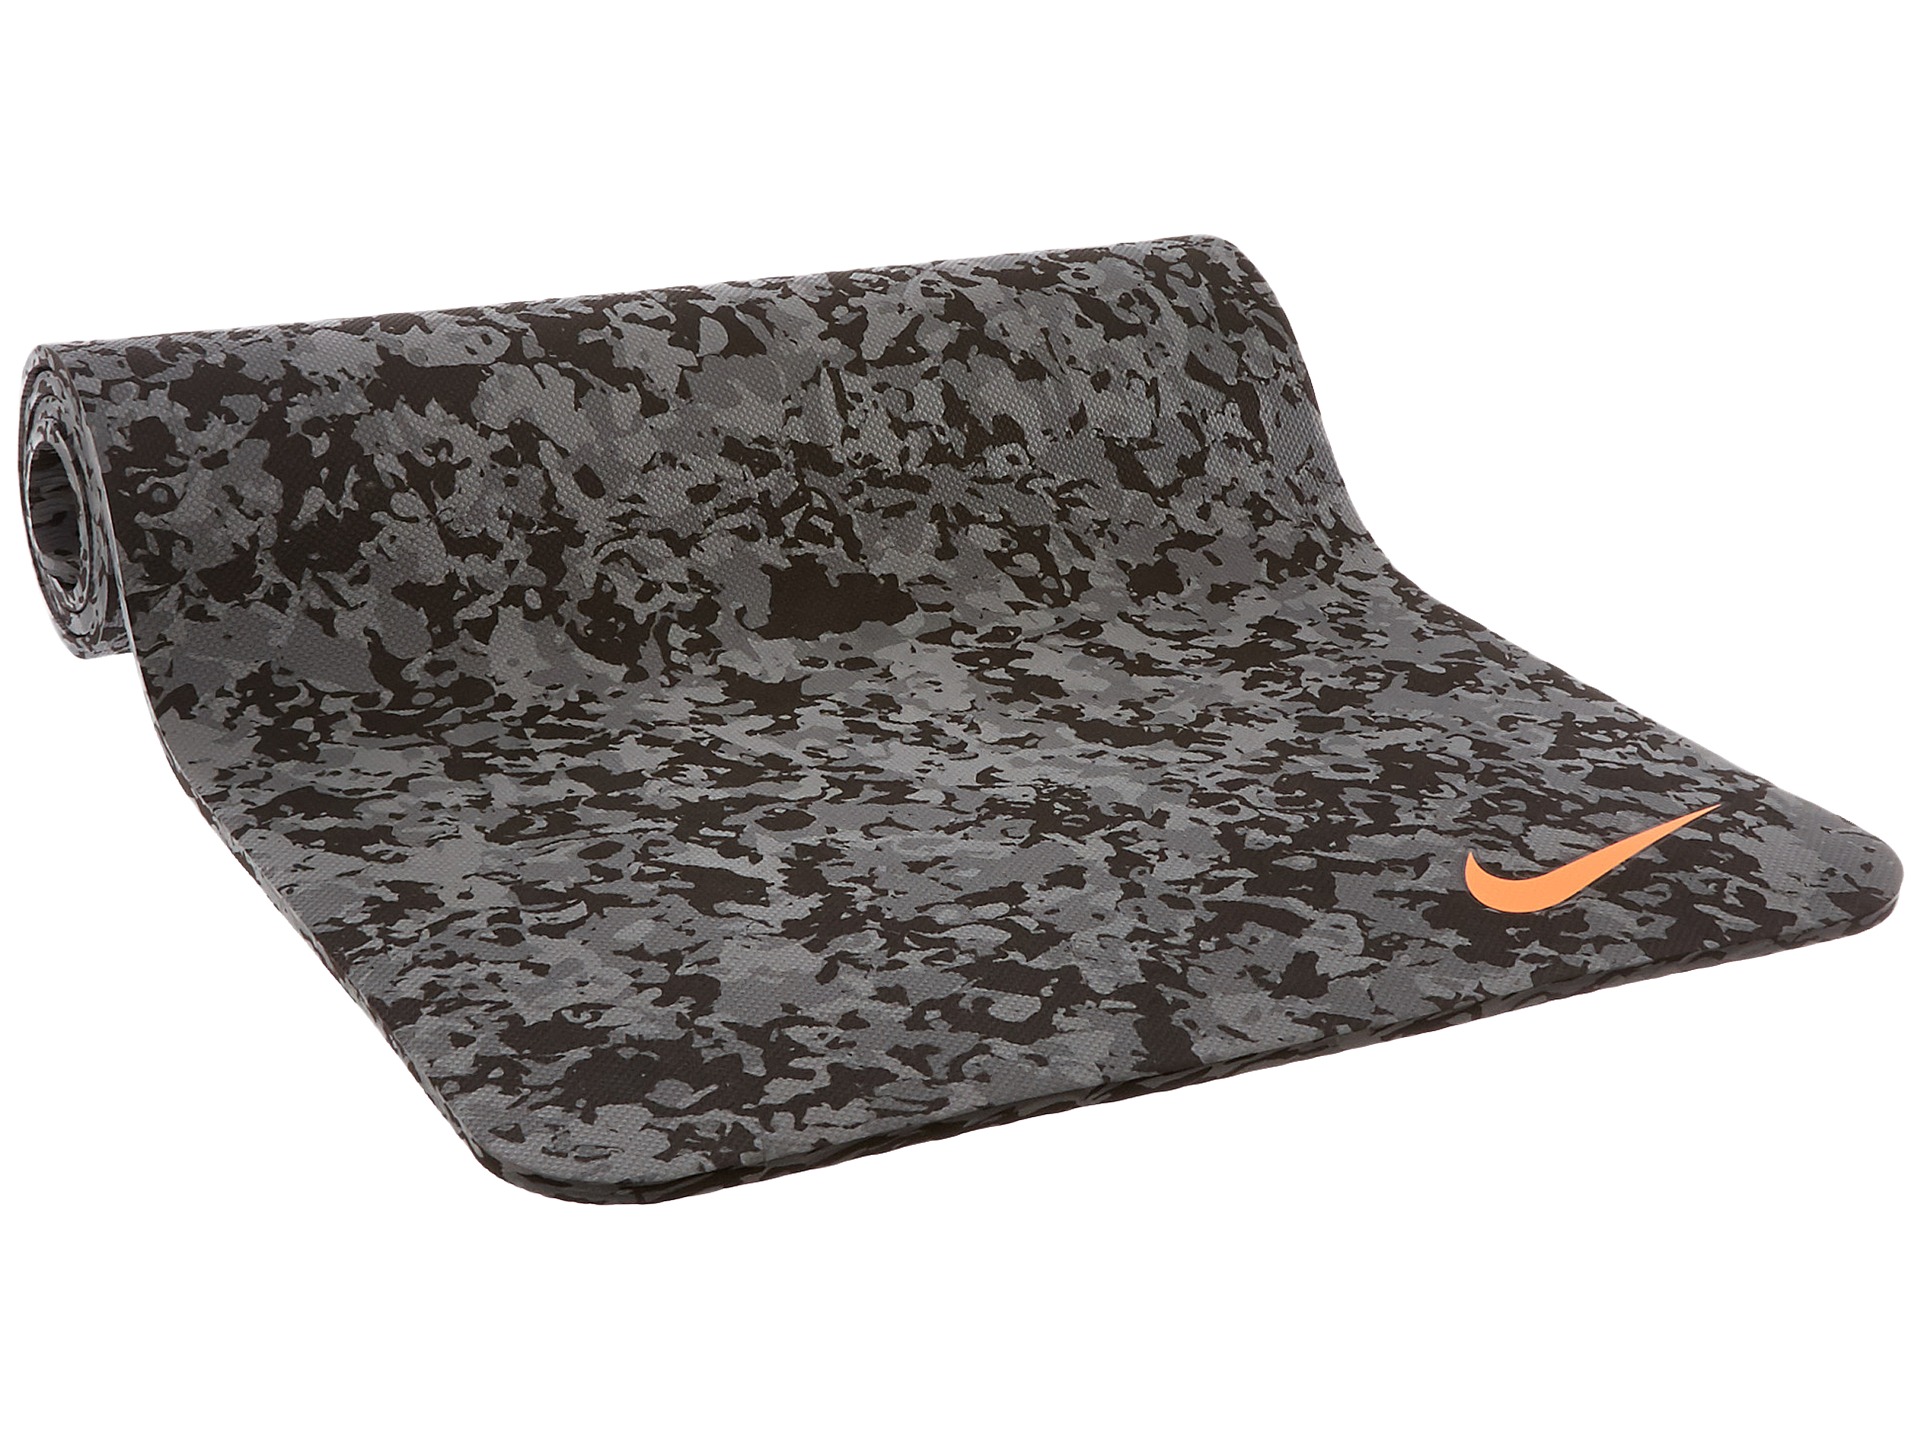 30 Minute Nike Workout Mat for Build Muscle